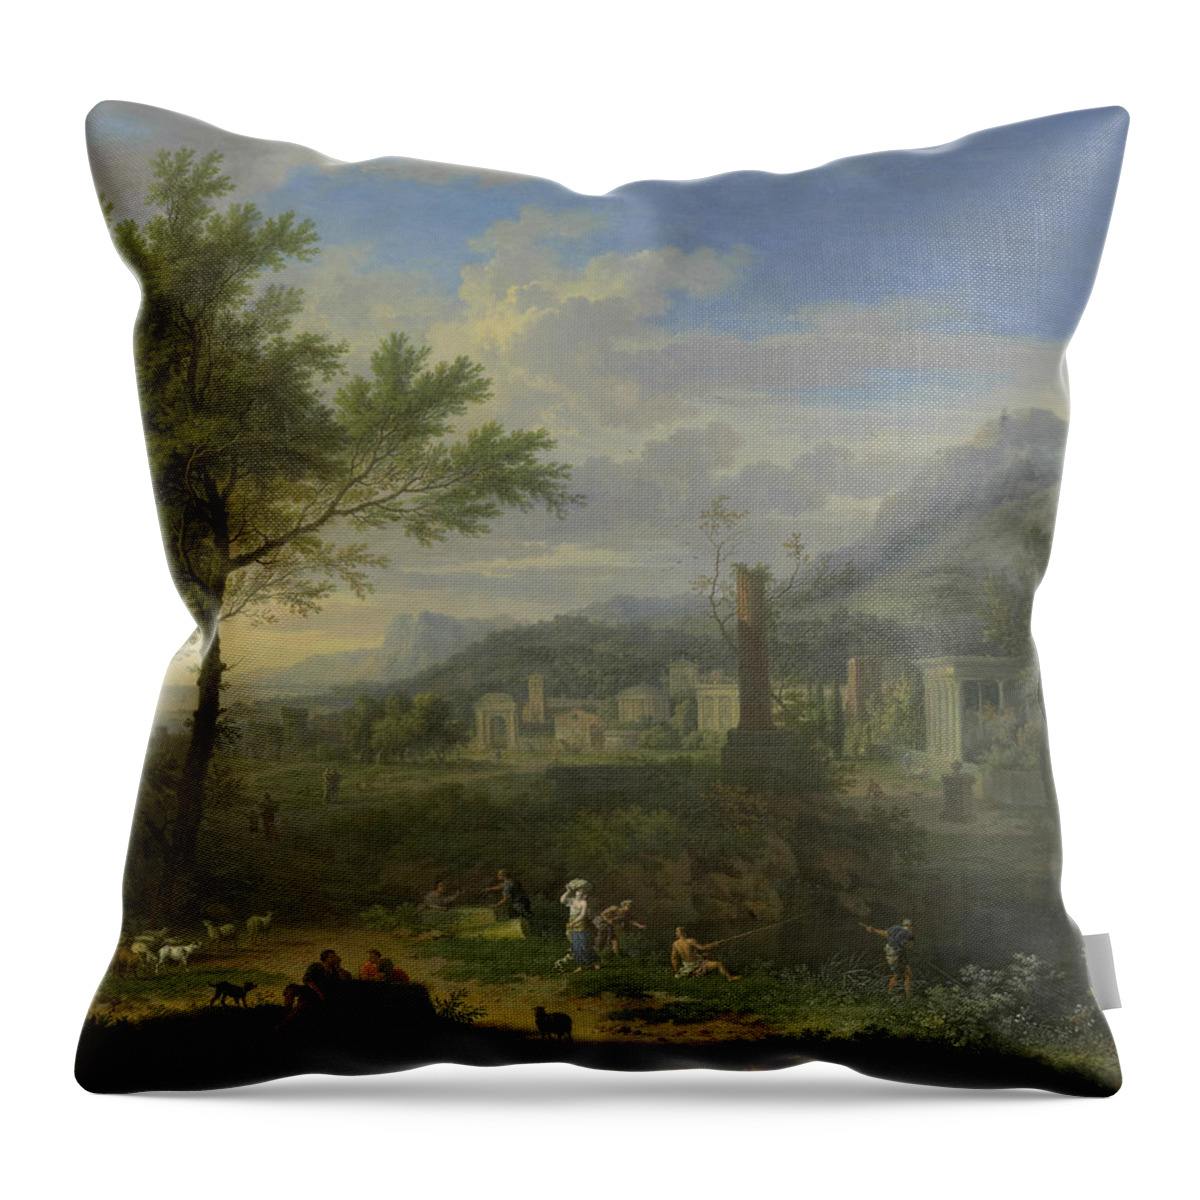 18th Century Art Throw Pillow featuring the painting Arcadian Landscape with Fishermen by Jan van Huysum